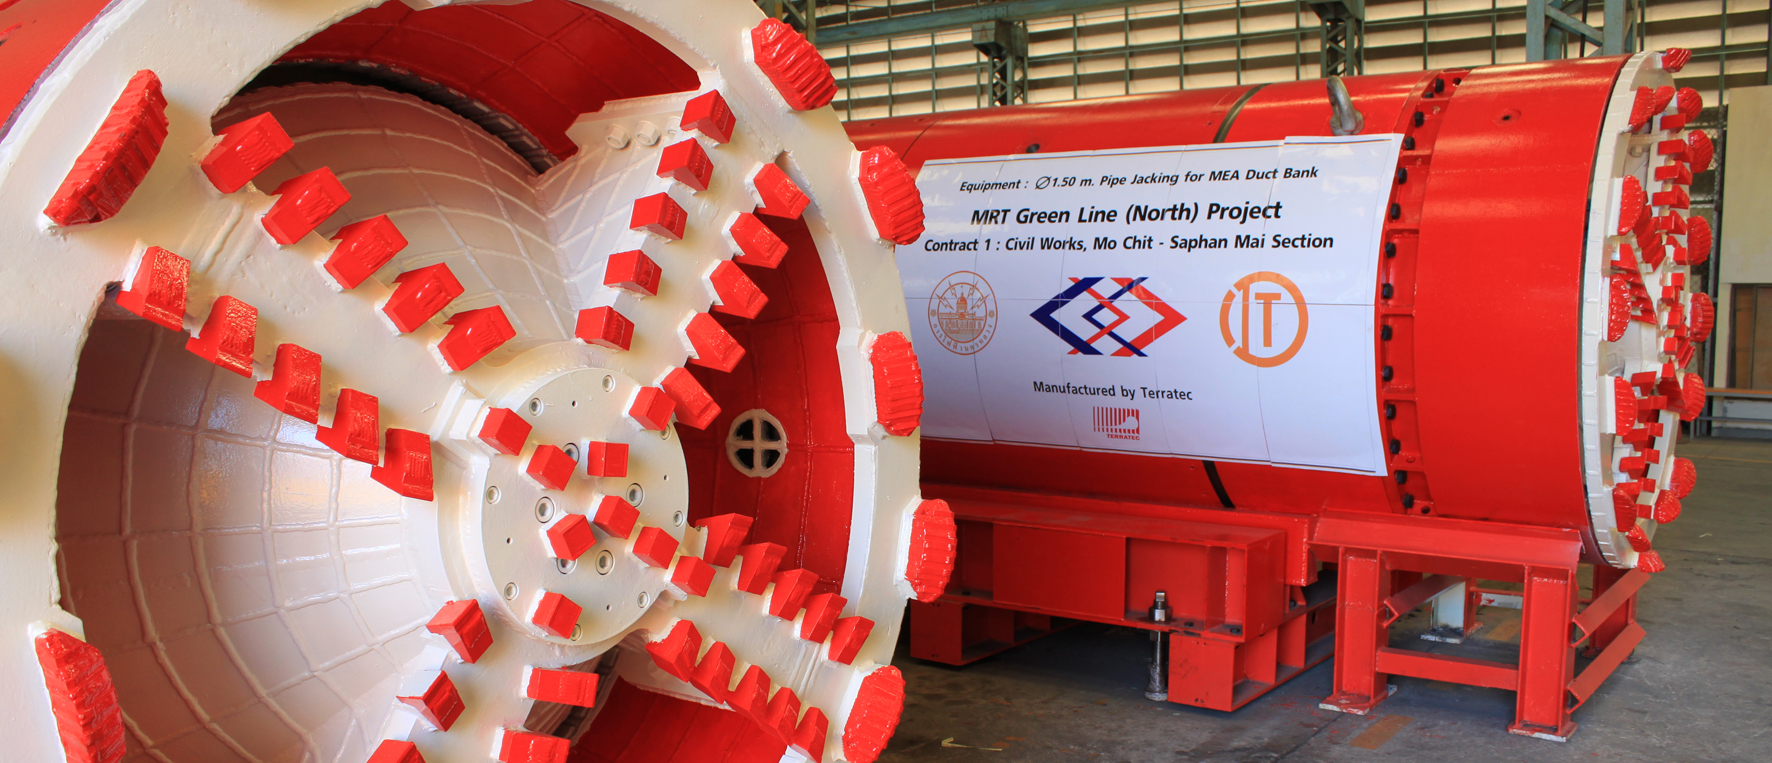 2 new microtunneling systems have delivered to Thailand for the MRTA Green Line (North) project